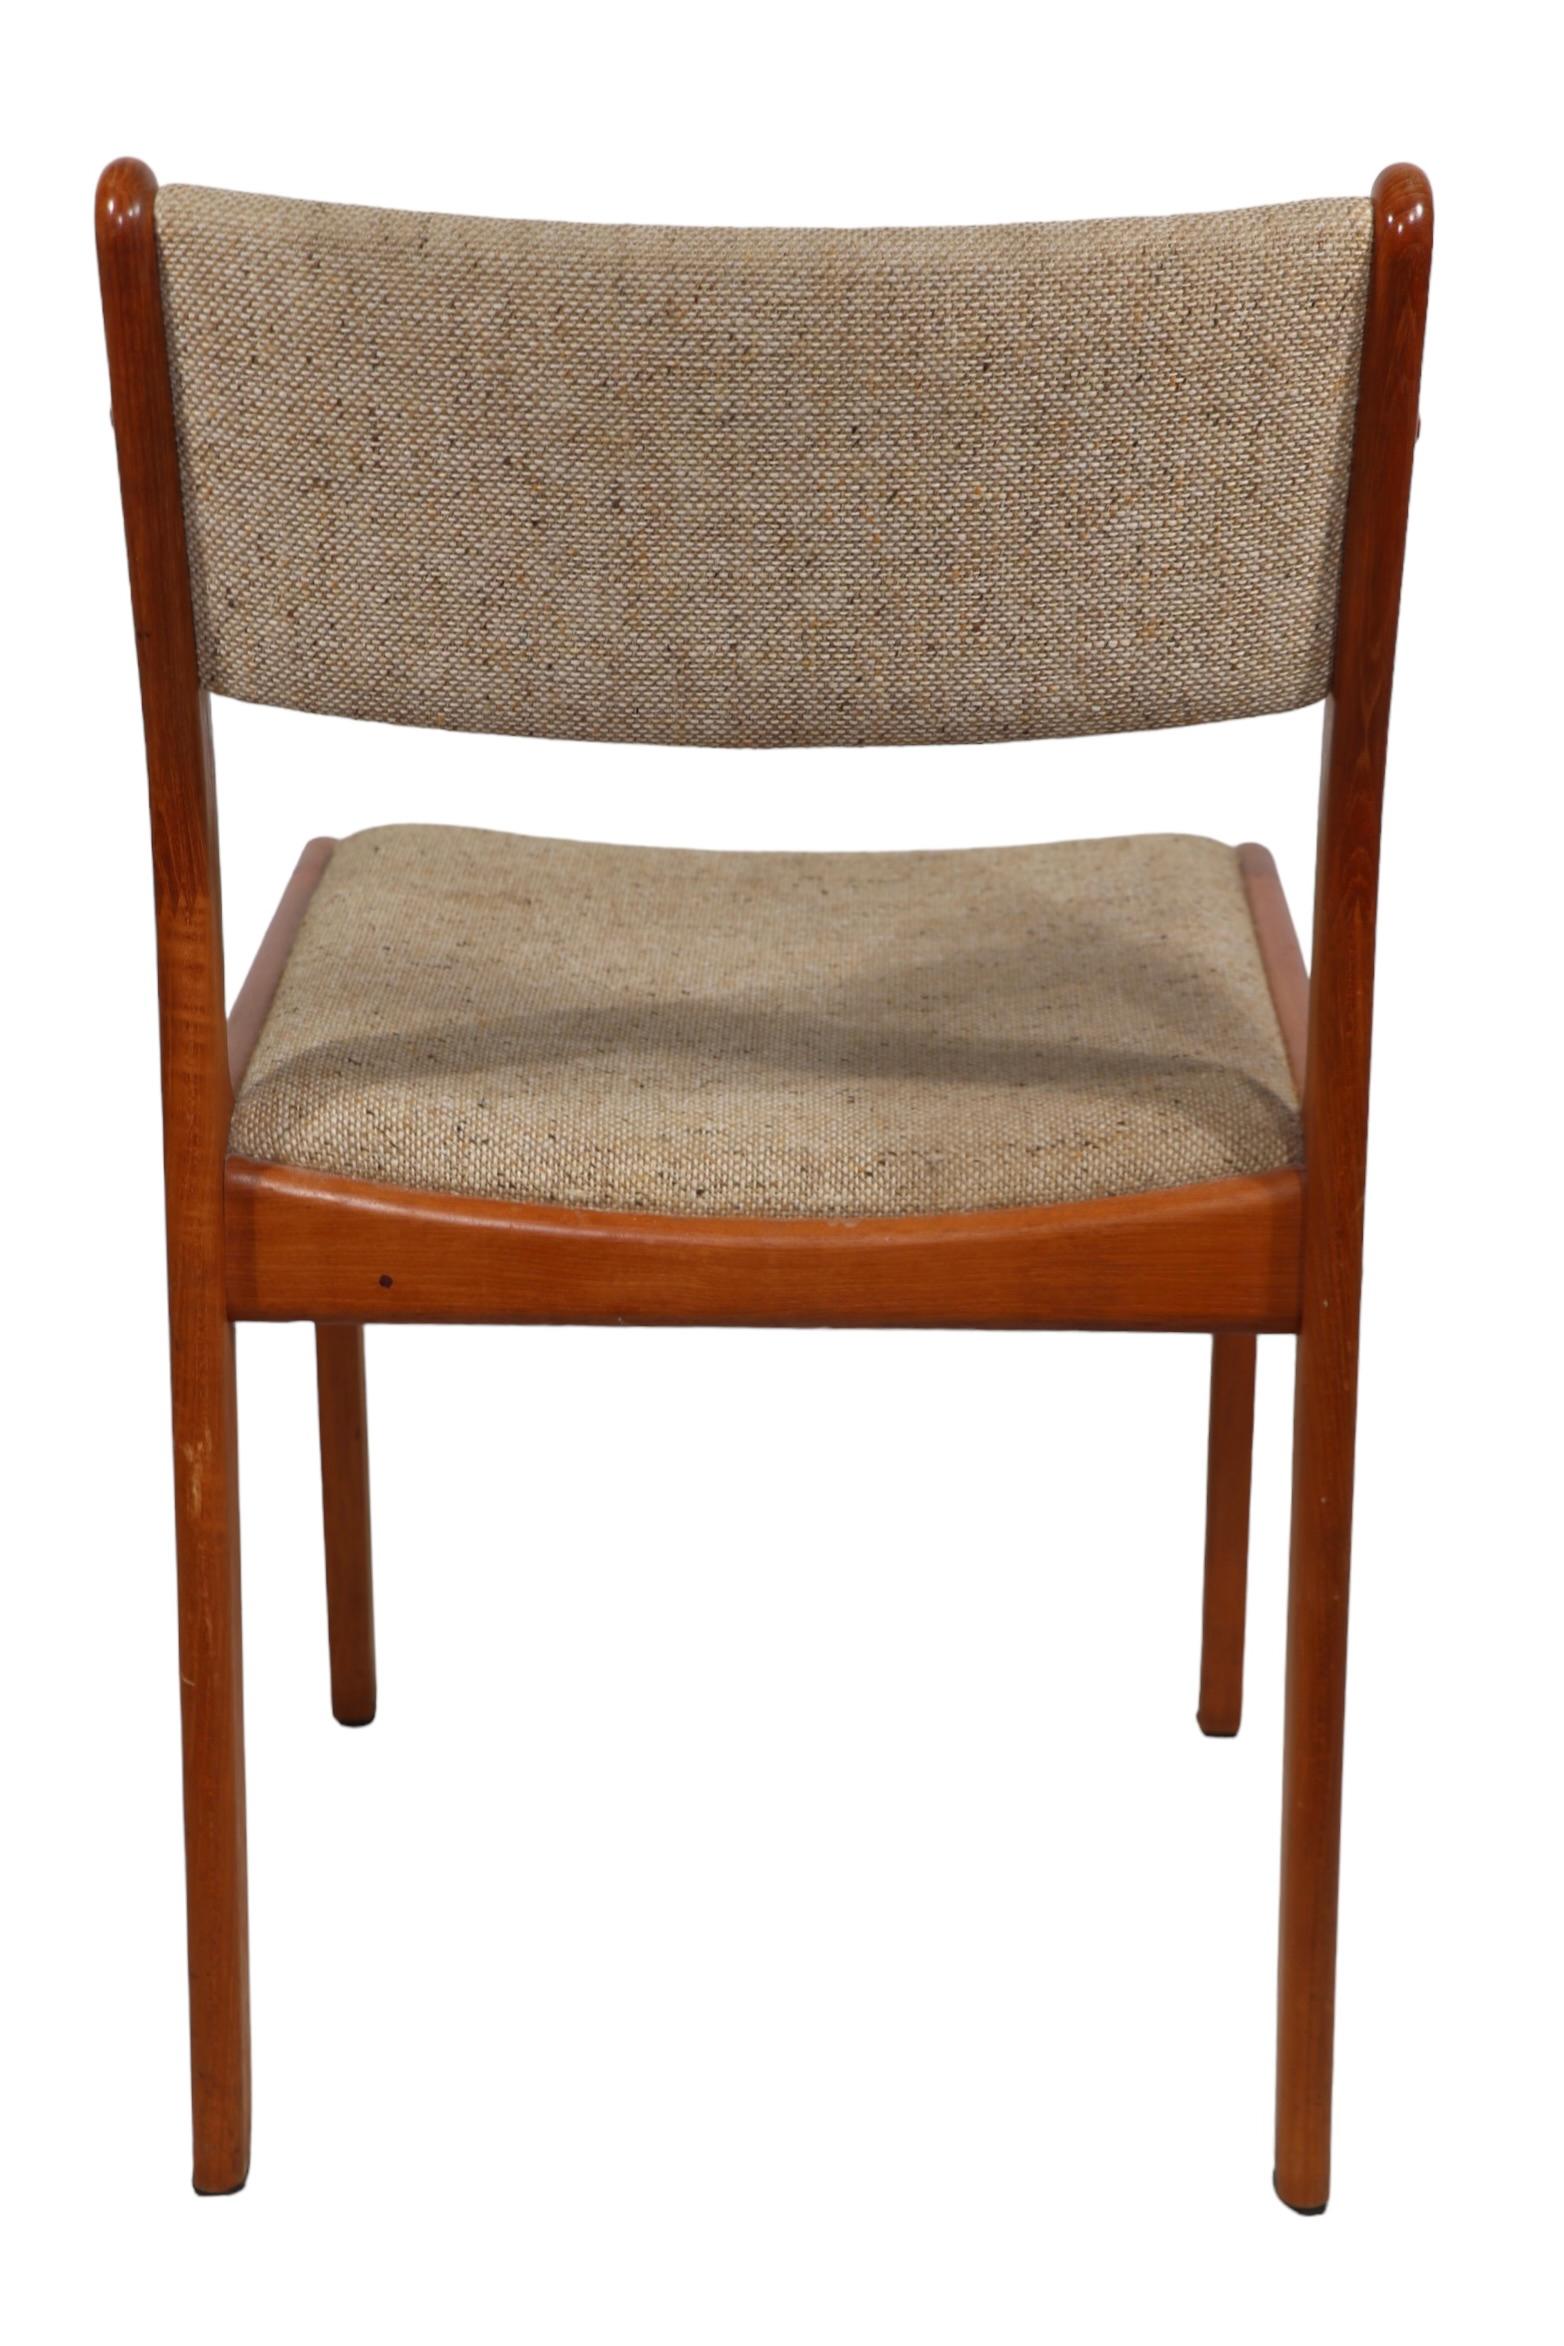 Four Teak  Danish Style Mid Century Dining Chairs by D Scan c 1950/1960's  For Sale 2